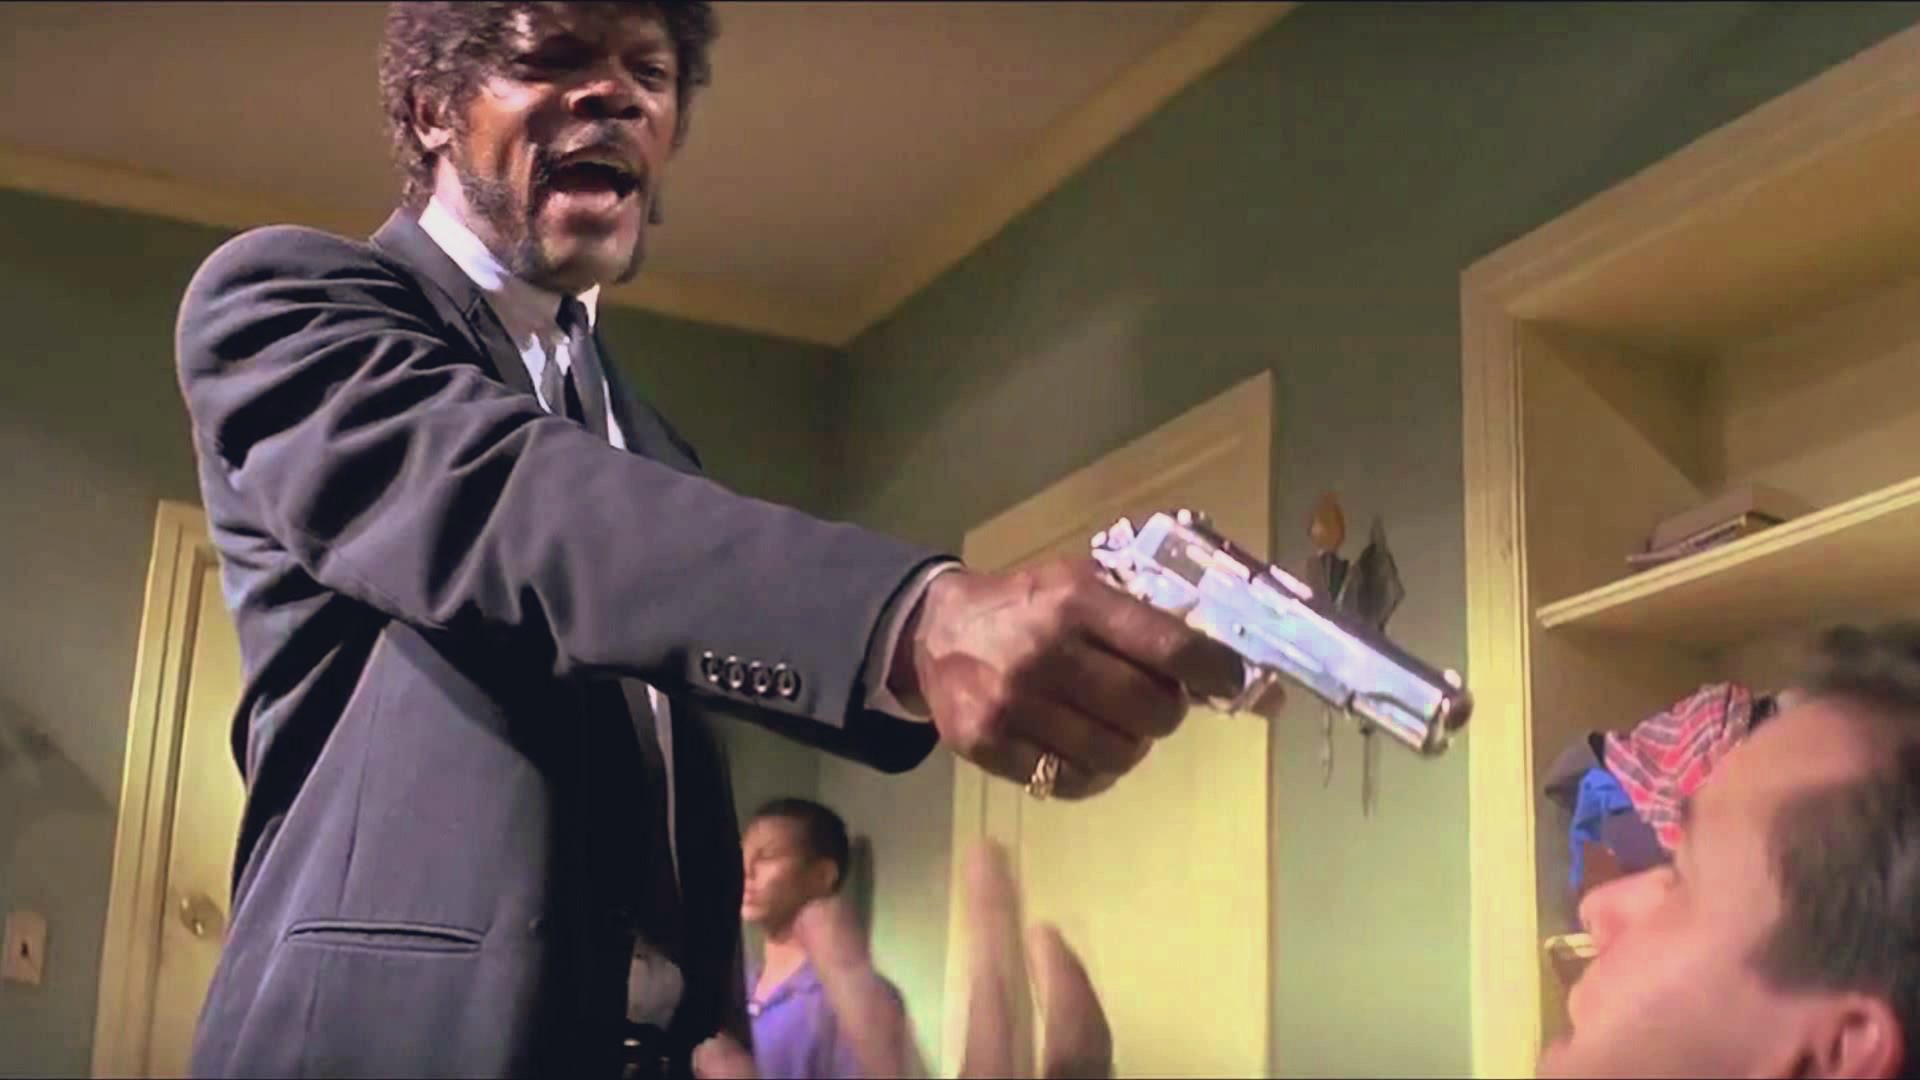 Make another meme i dare you, i double dare you motherfucker! - I